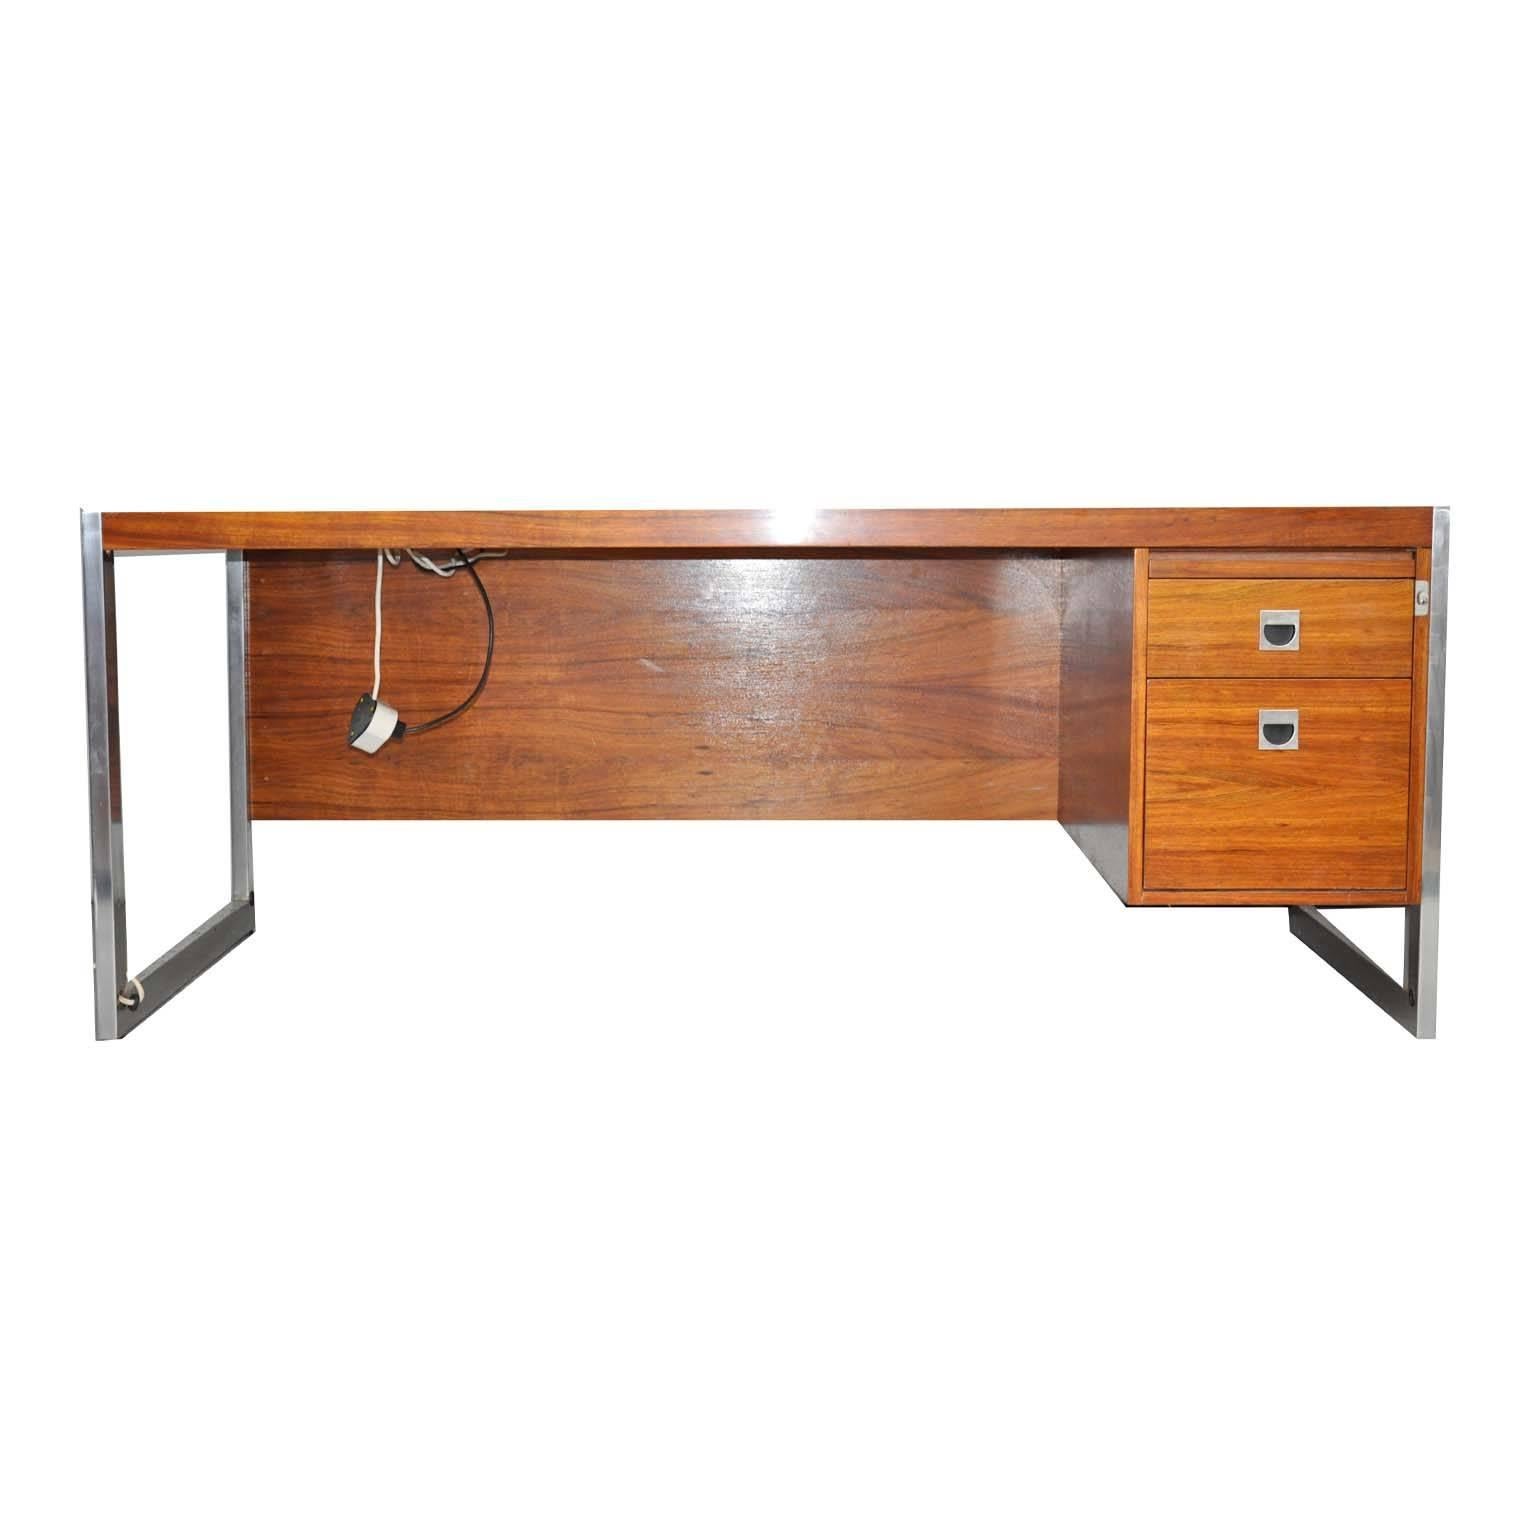 Solid executive desk with rosewood top, back and drawers and metal frame.
This desk has a built in socket and plug.